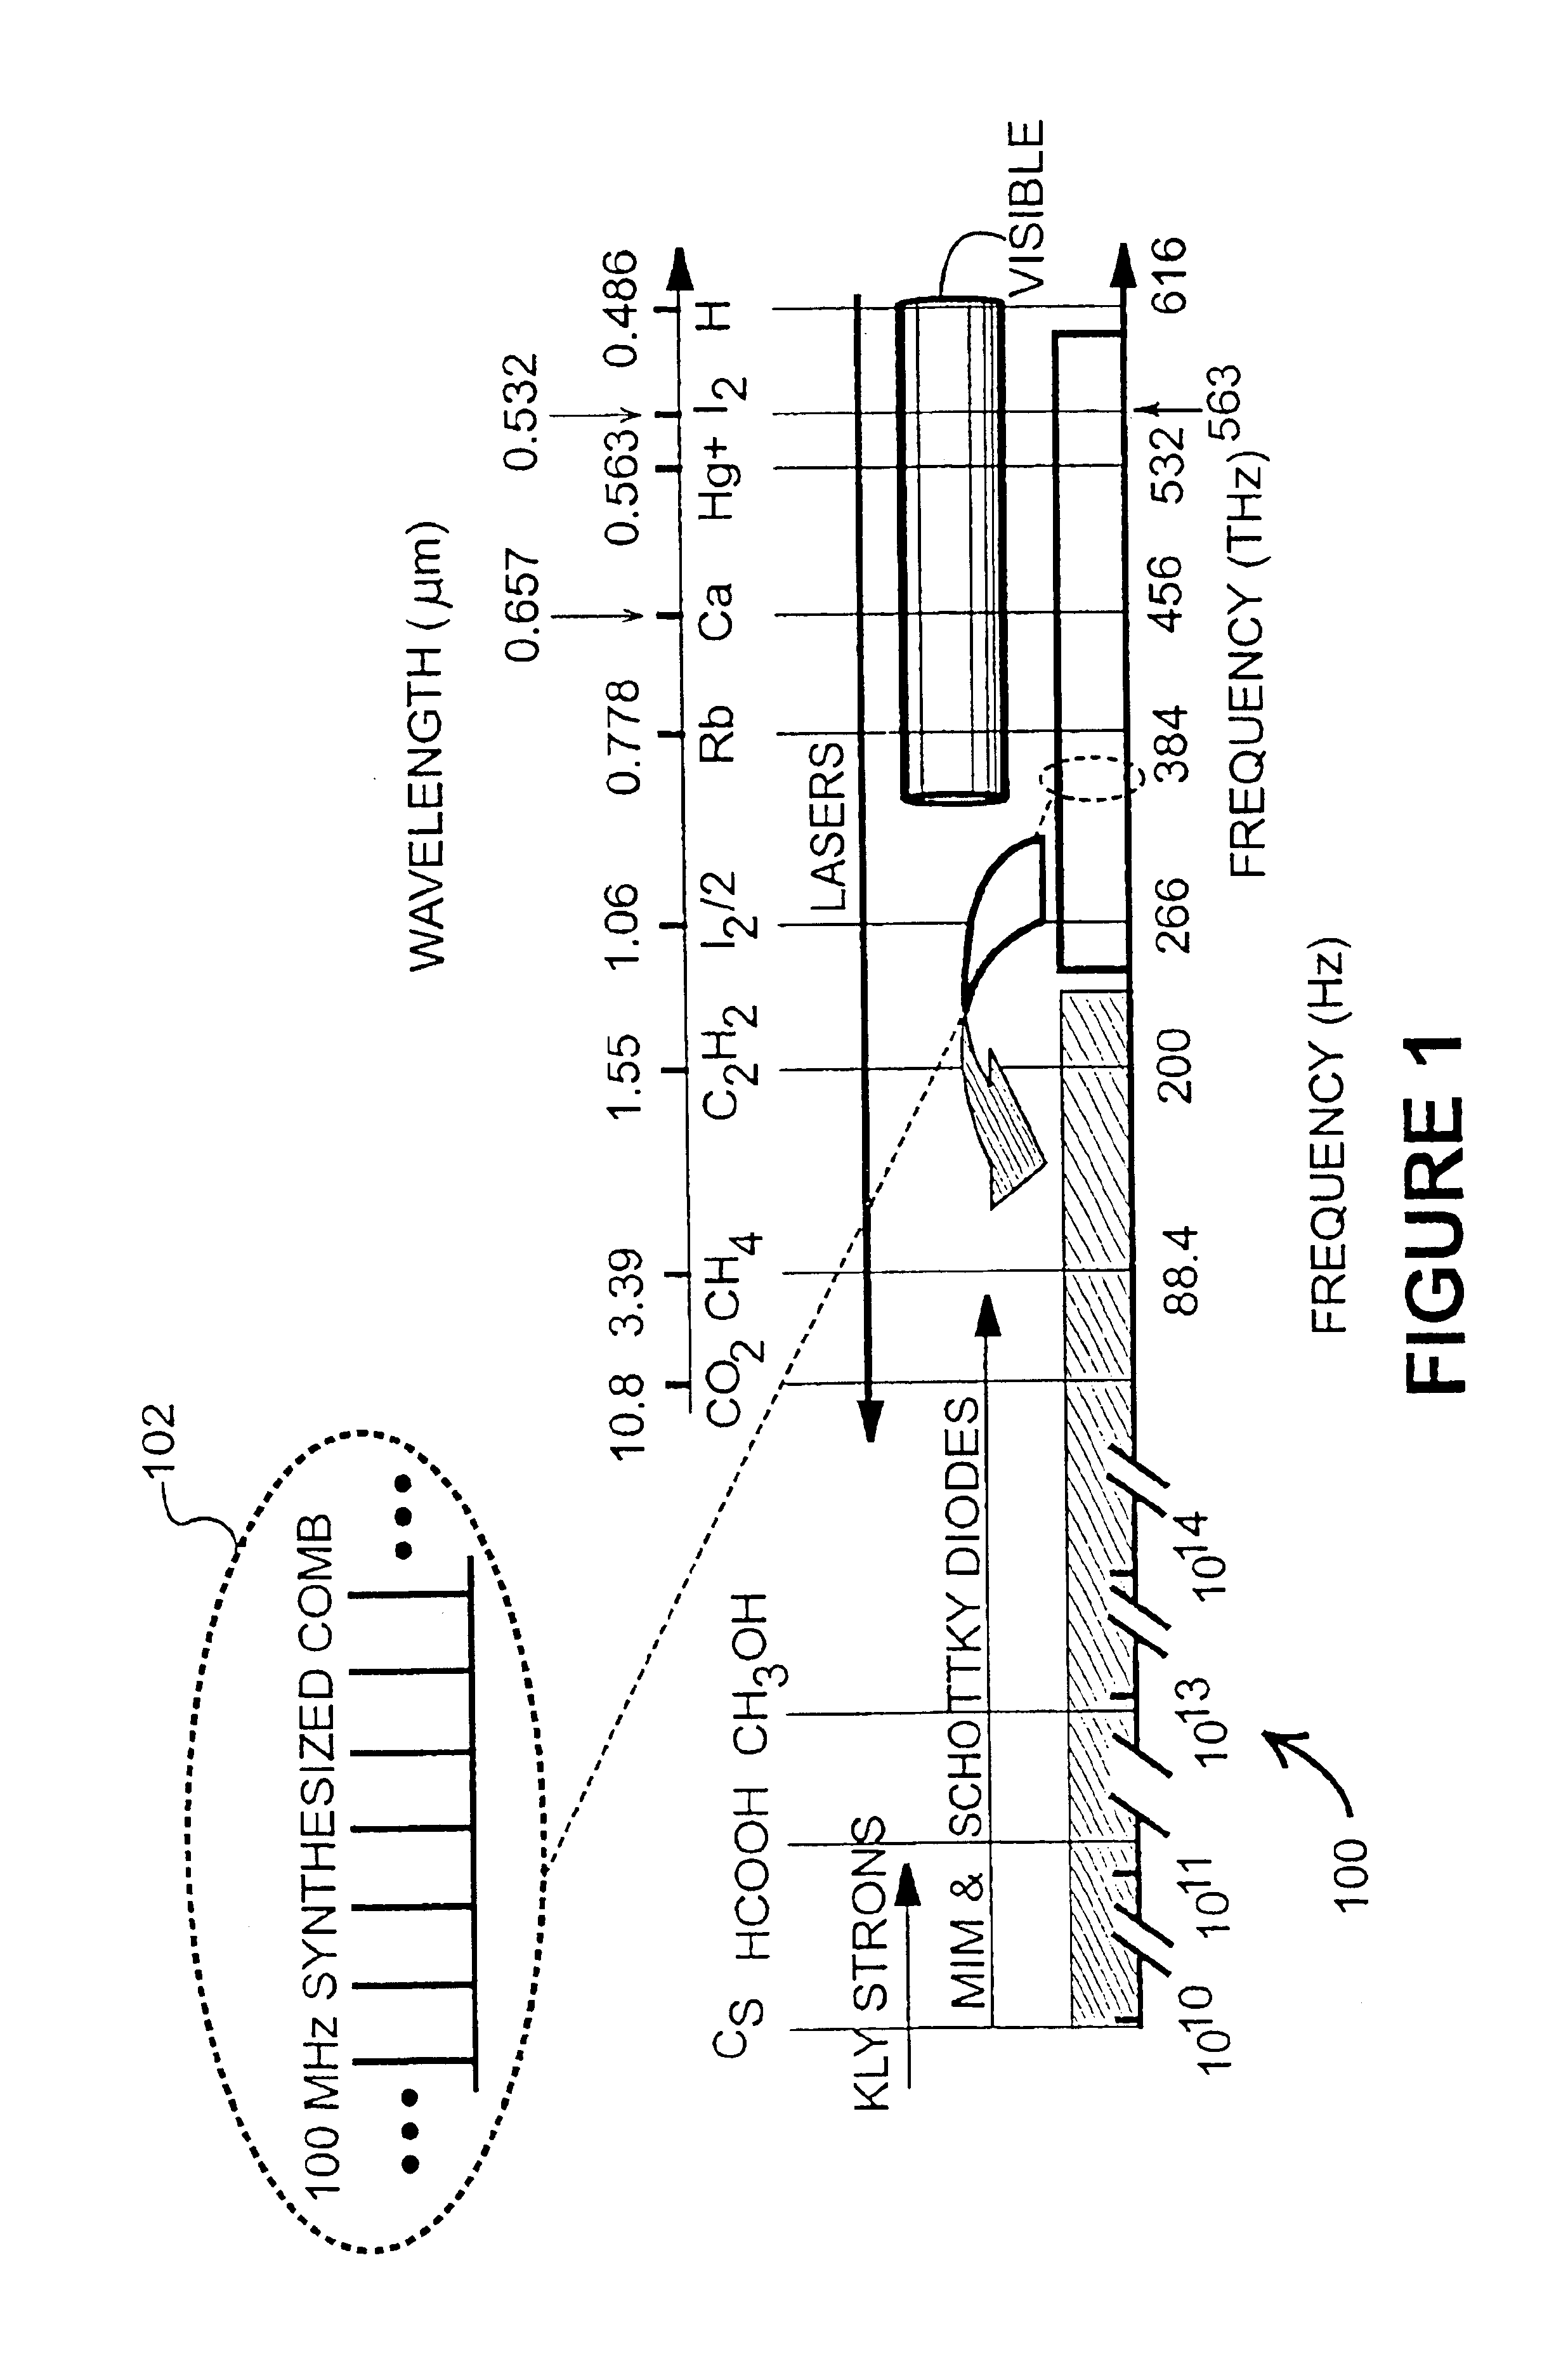 Mode-locked pulsed laser system and method